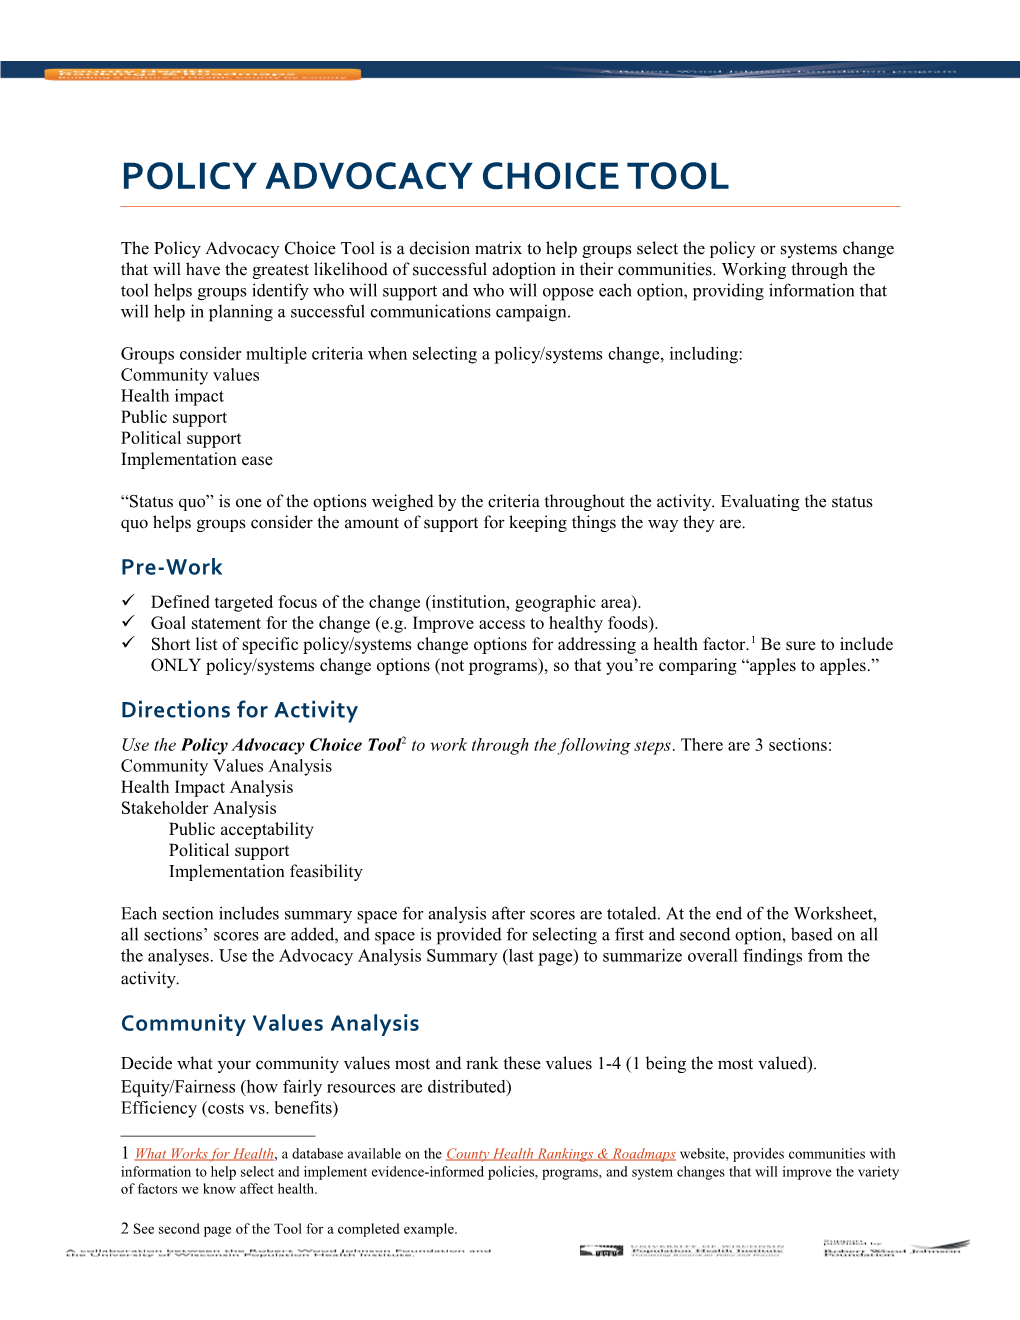 Policy Advocacy Choice Tool